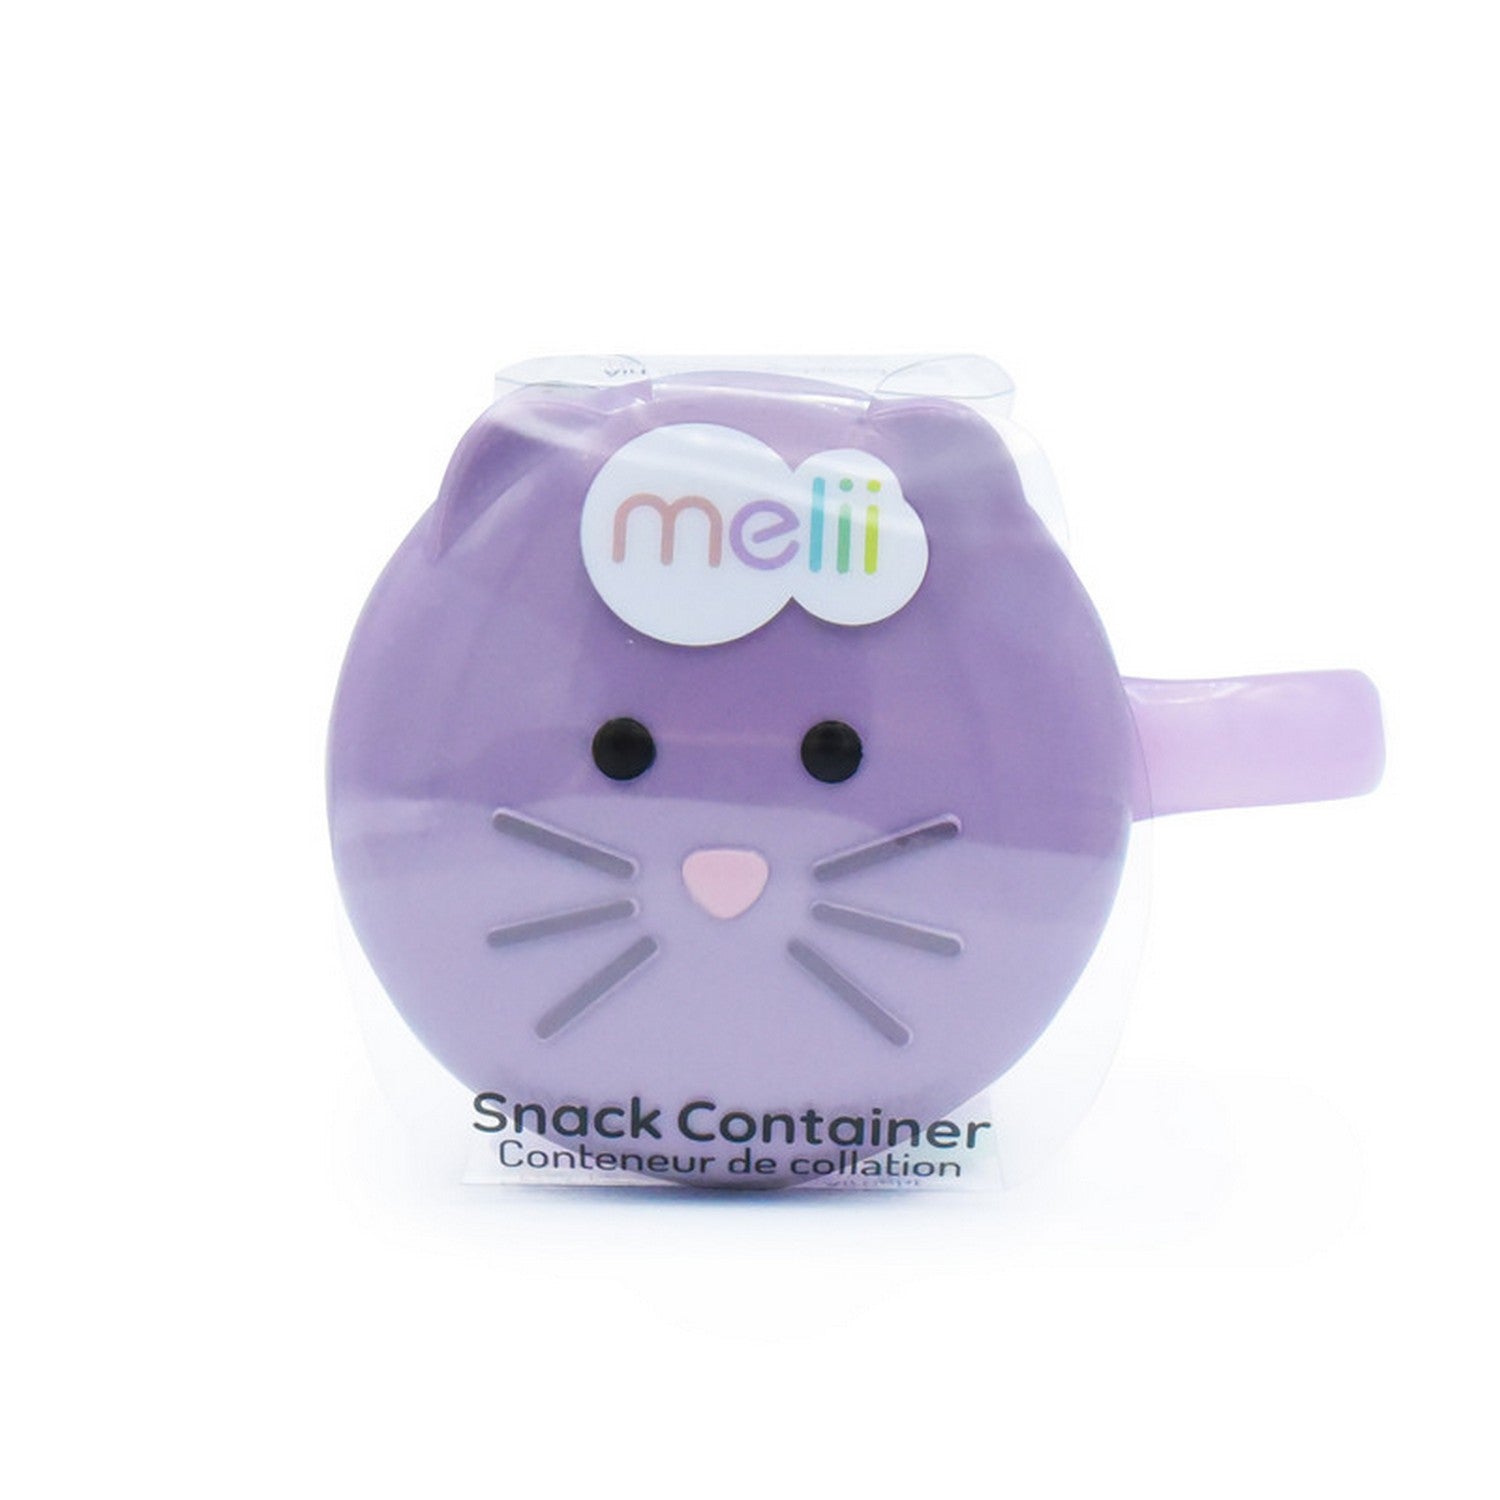 Melii Snack Container with Finger Trap - Cat Purple